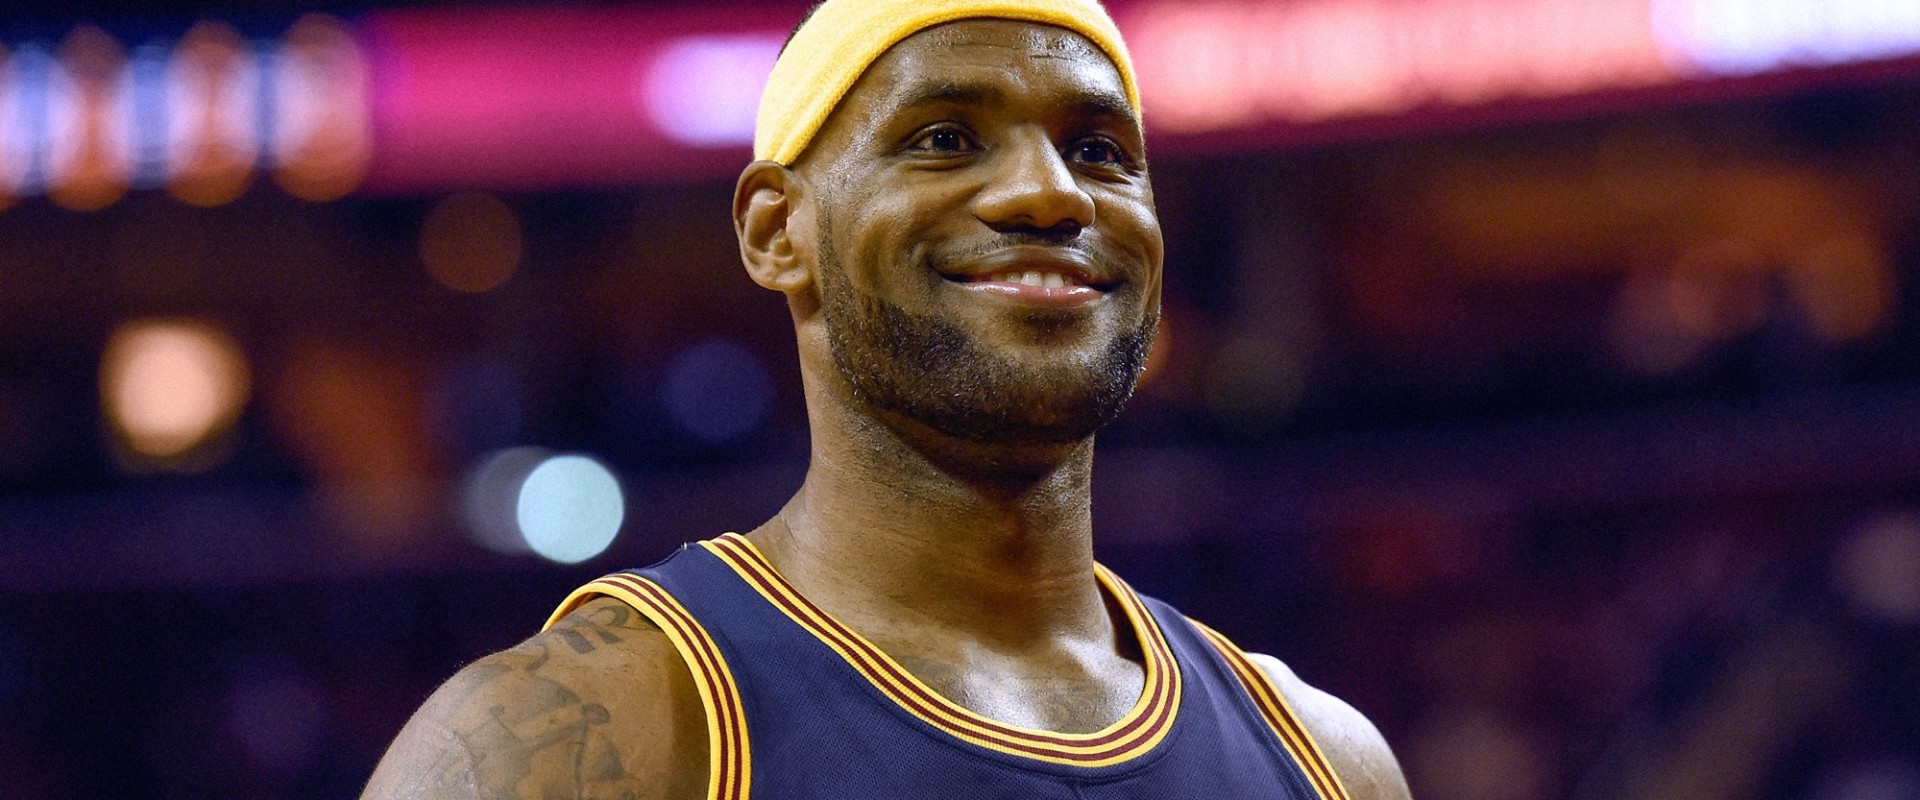 The Inspiring Story of LeBron James and His Journey to Success